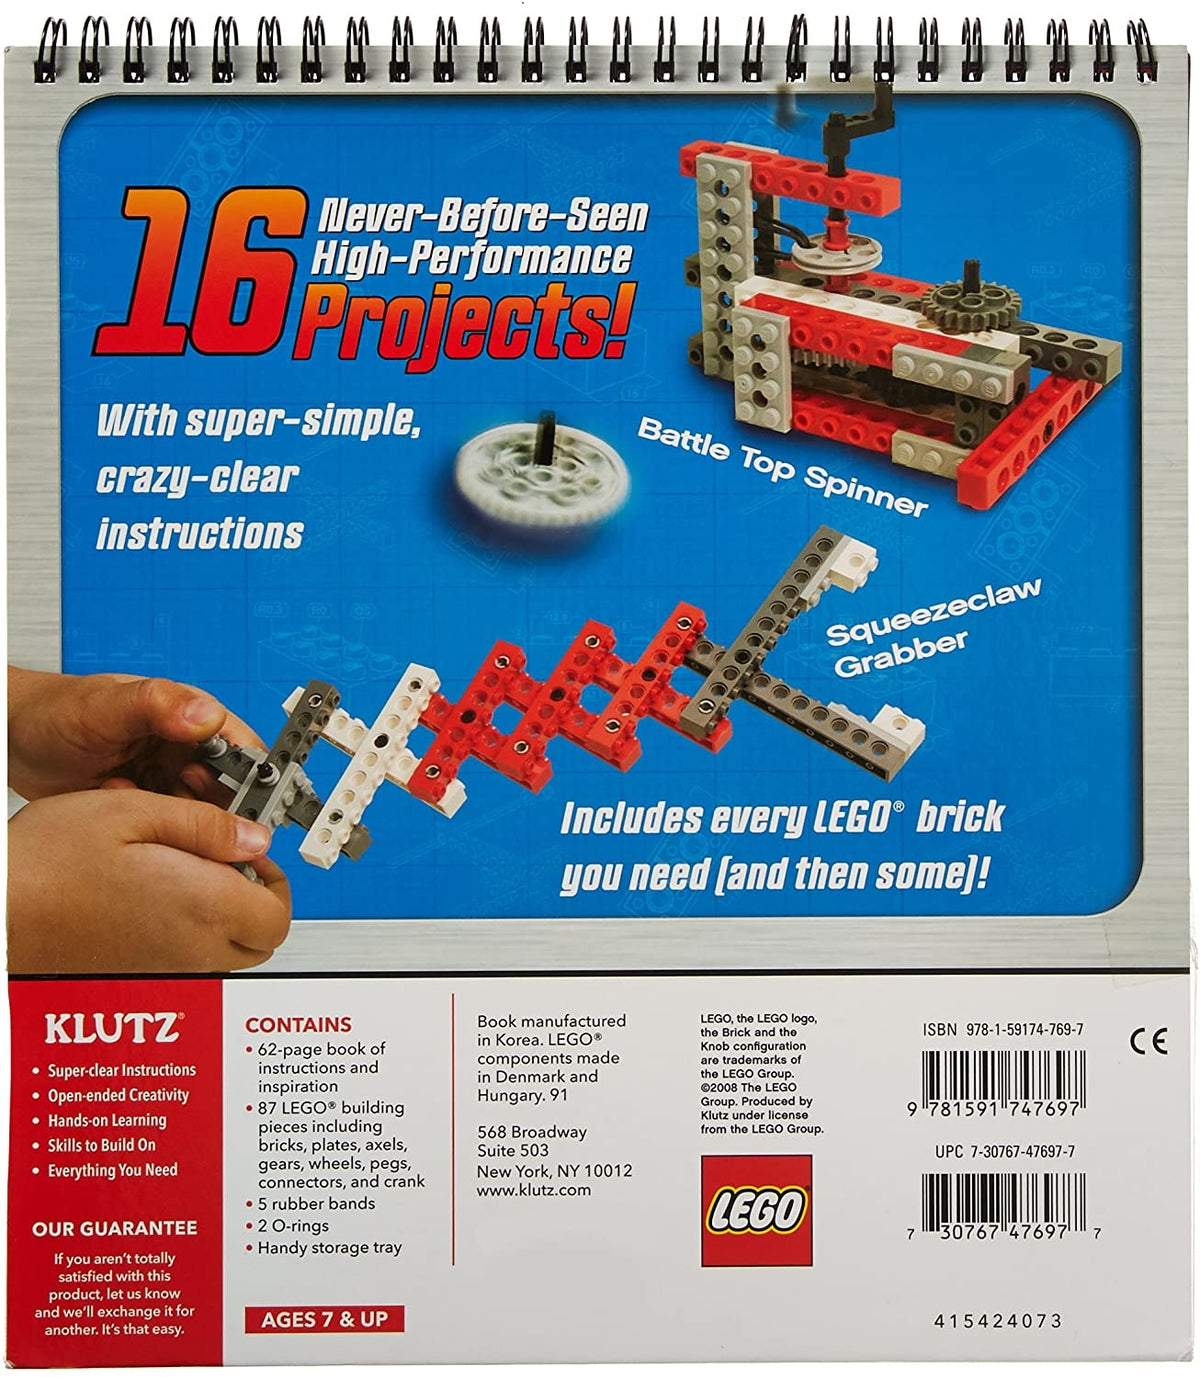 LEGO CRAZY ACTION CONTRAPTIONS (M) Cover